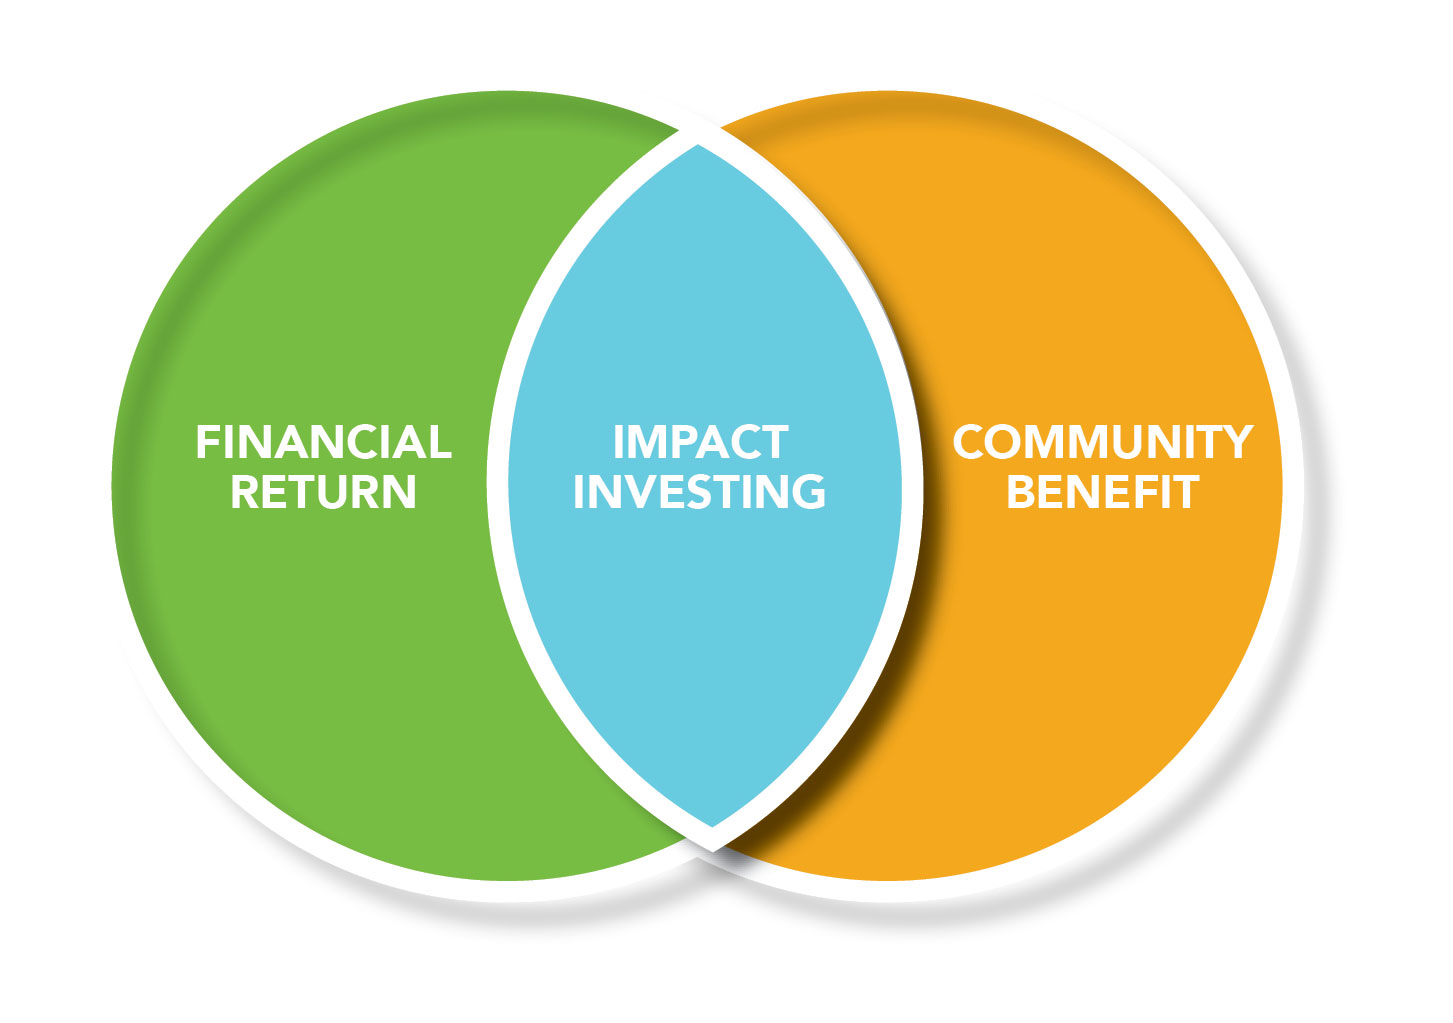 Venn diagram of Financial Return on left, Community Benefit on right, and the center mix as Impact Investing